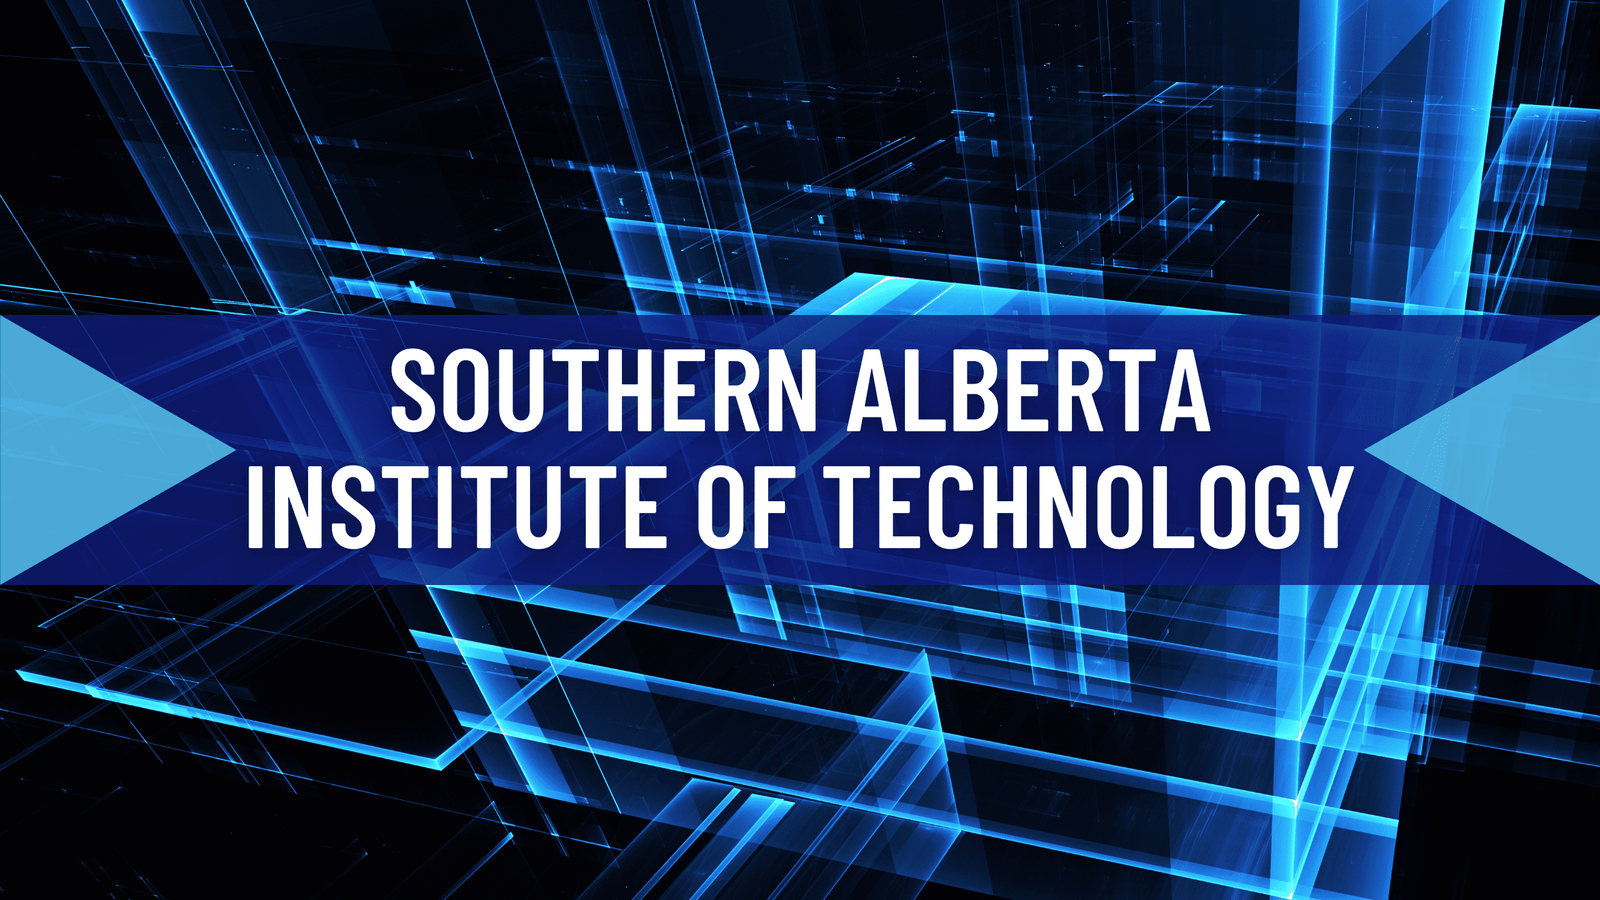 The Southern Alberta Institute Of Technology is an educational & learning Institute. It is also known as the first Canada's publicly funded technical institute.